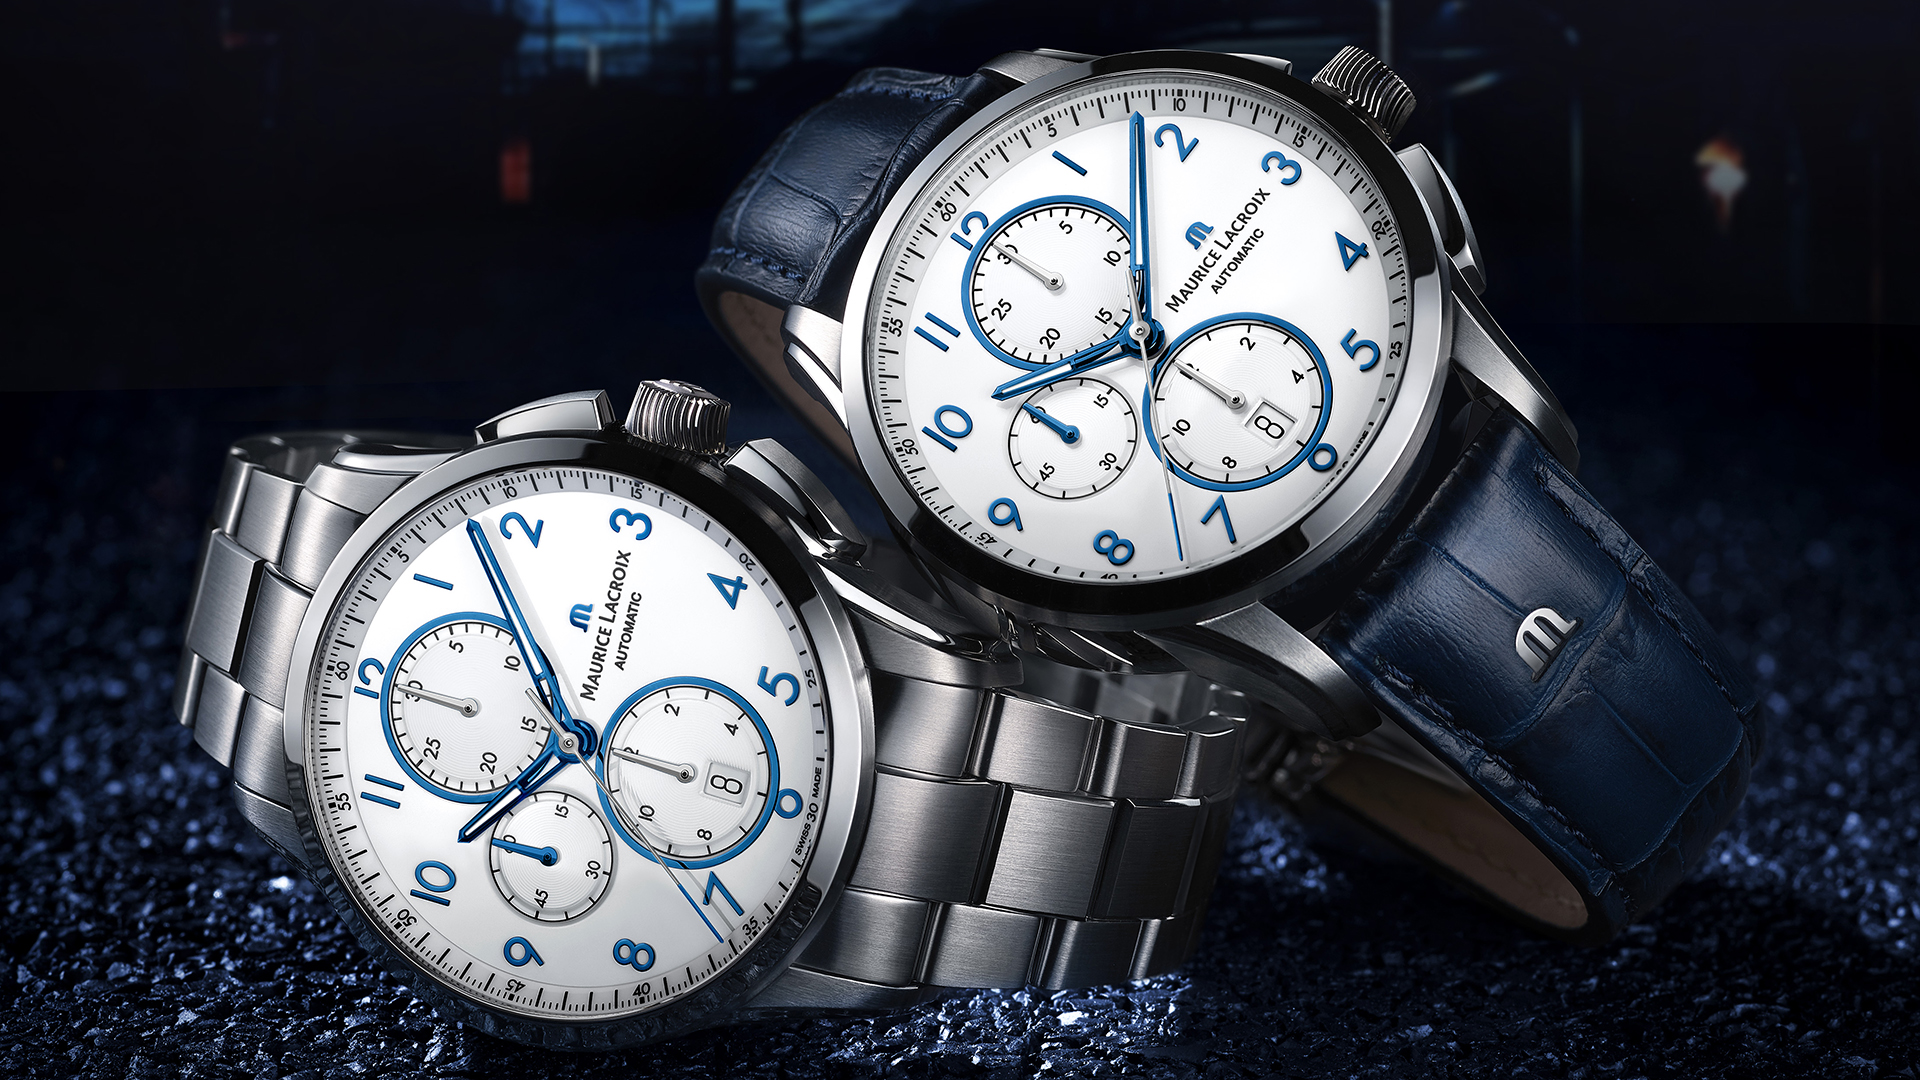 Maurice Lacroix Celebrates 20 Years Of Pontos Collection With Five New Models